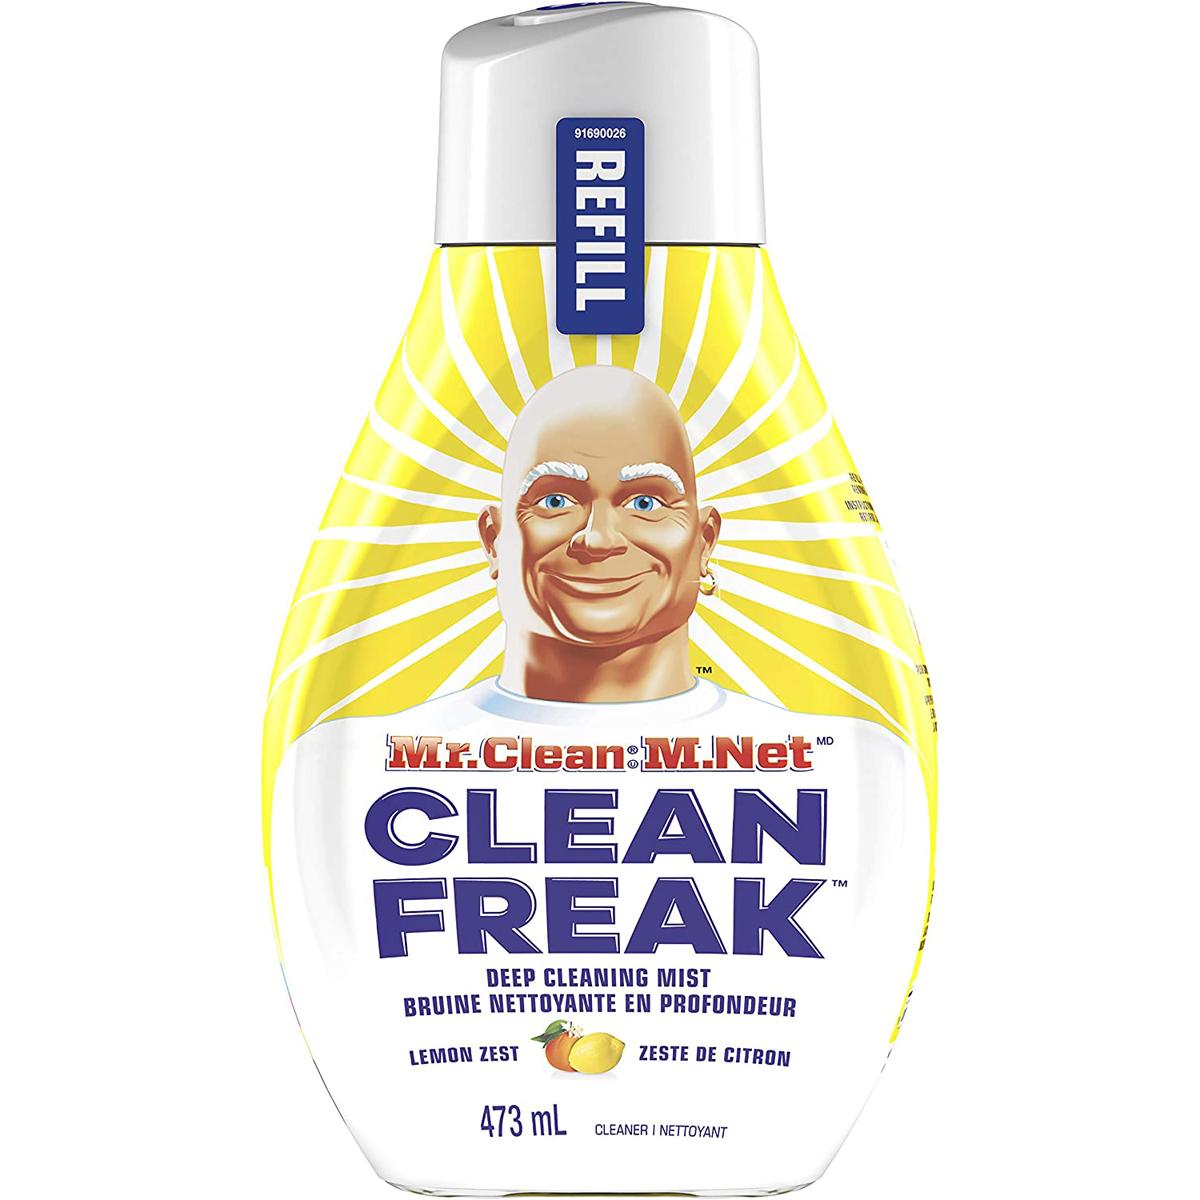 Mr Clean Deep Cleaning Mist Multi-Surface Spray Refill 4 Pack for $7.90 Shipped